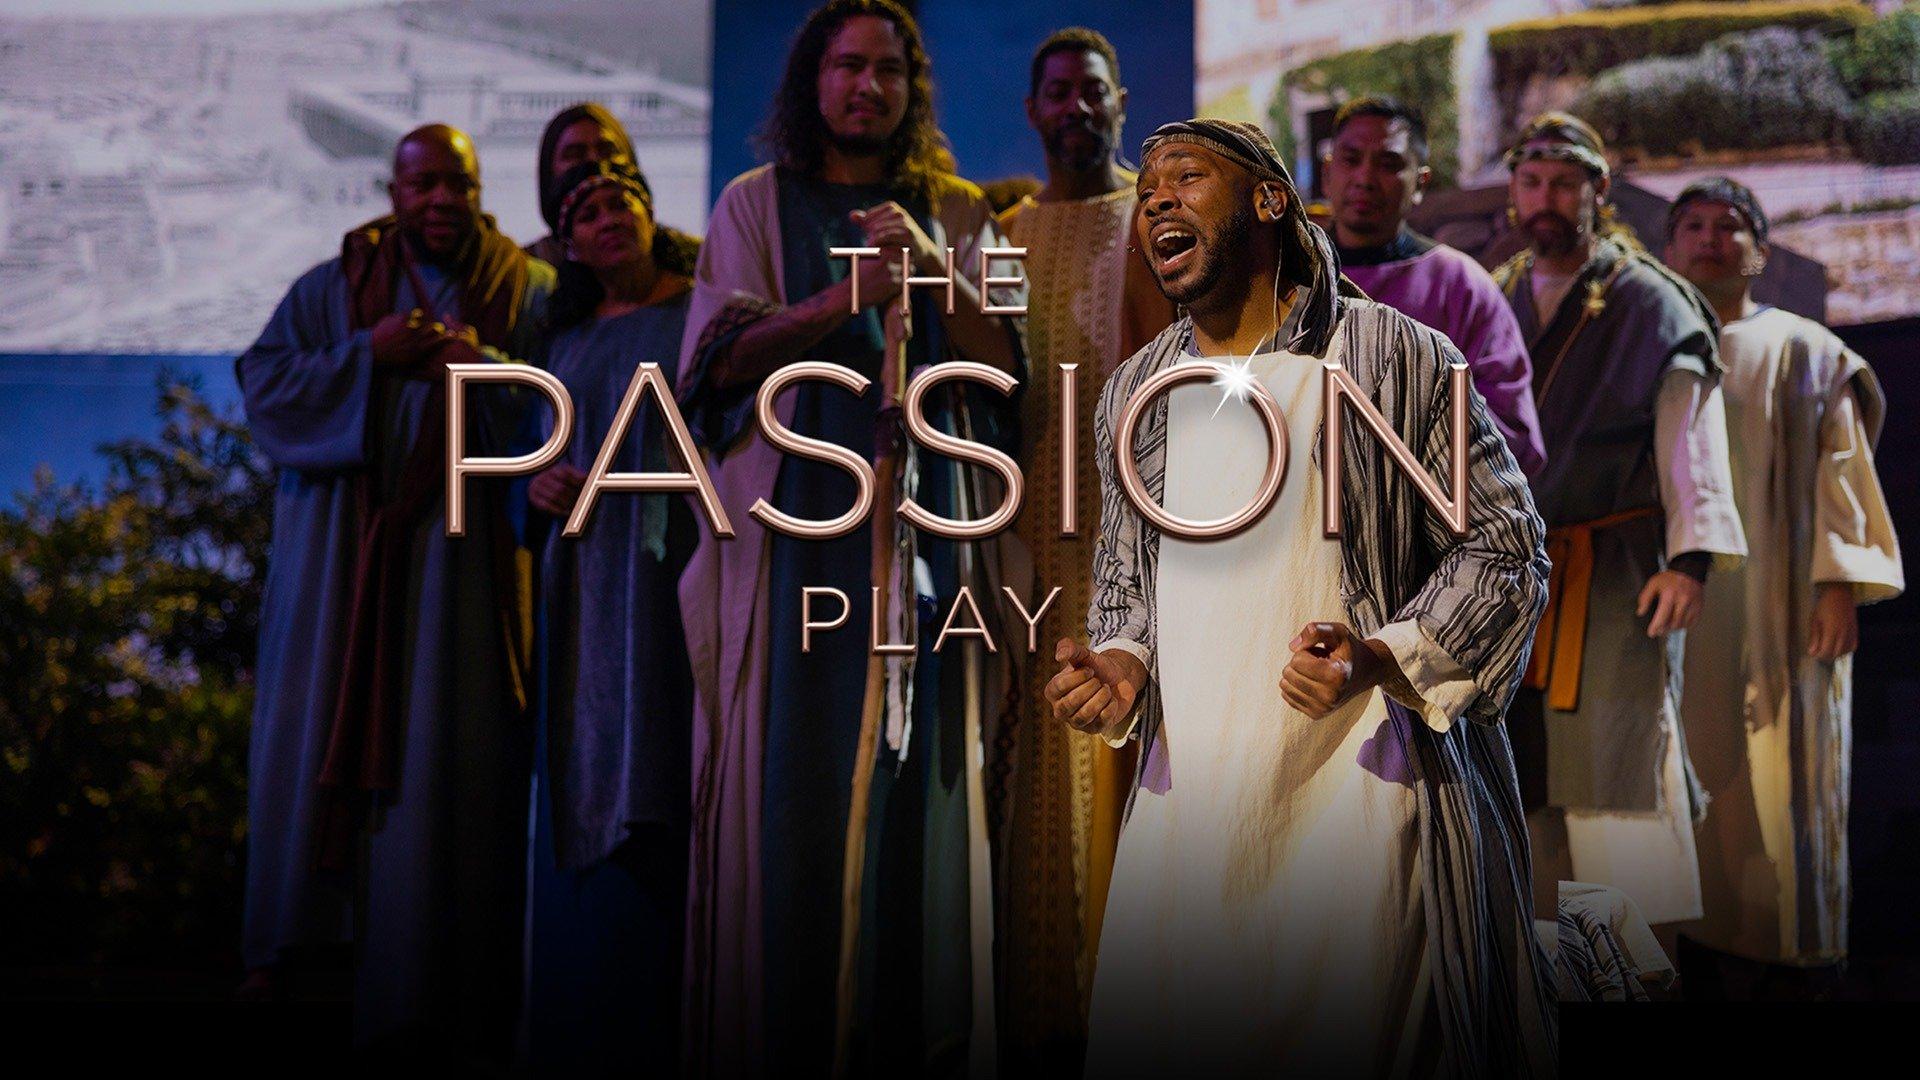 Watch The Passion Play Streaming Online On Philo Free Trial